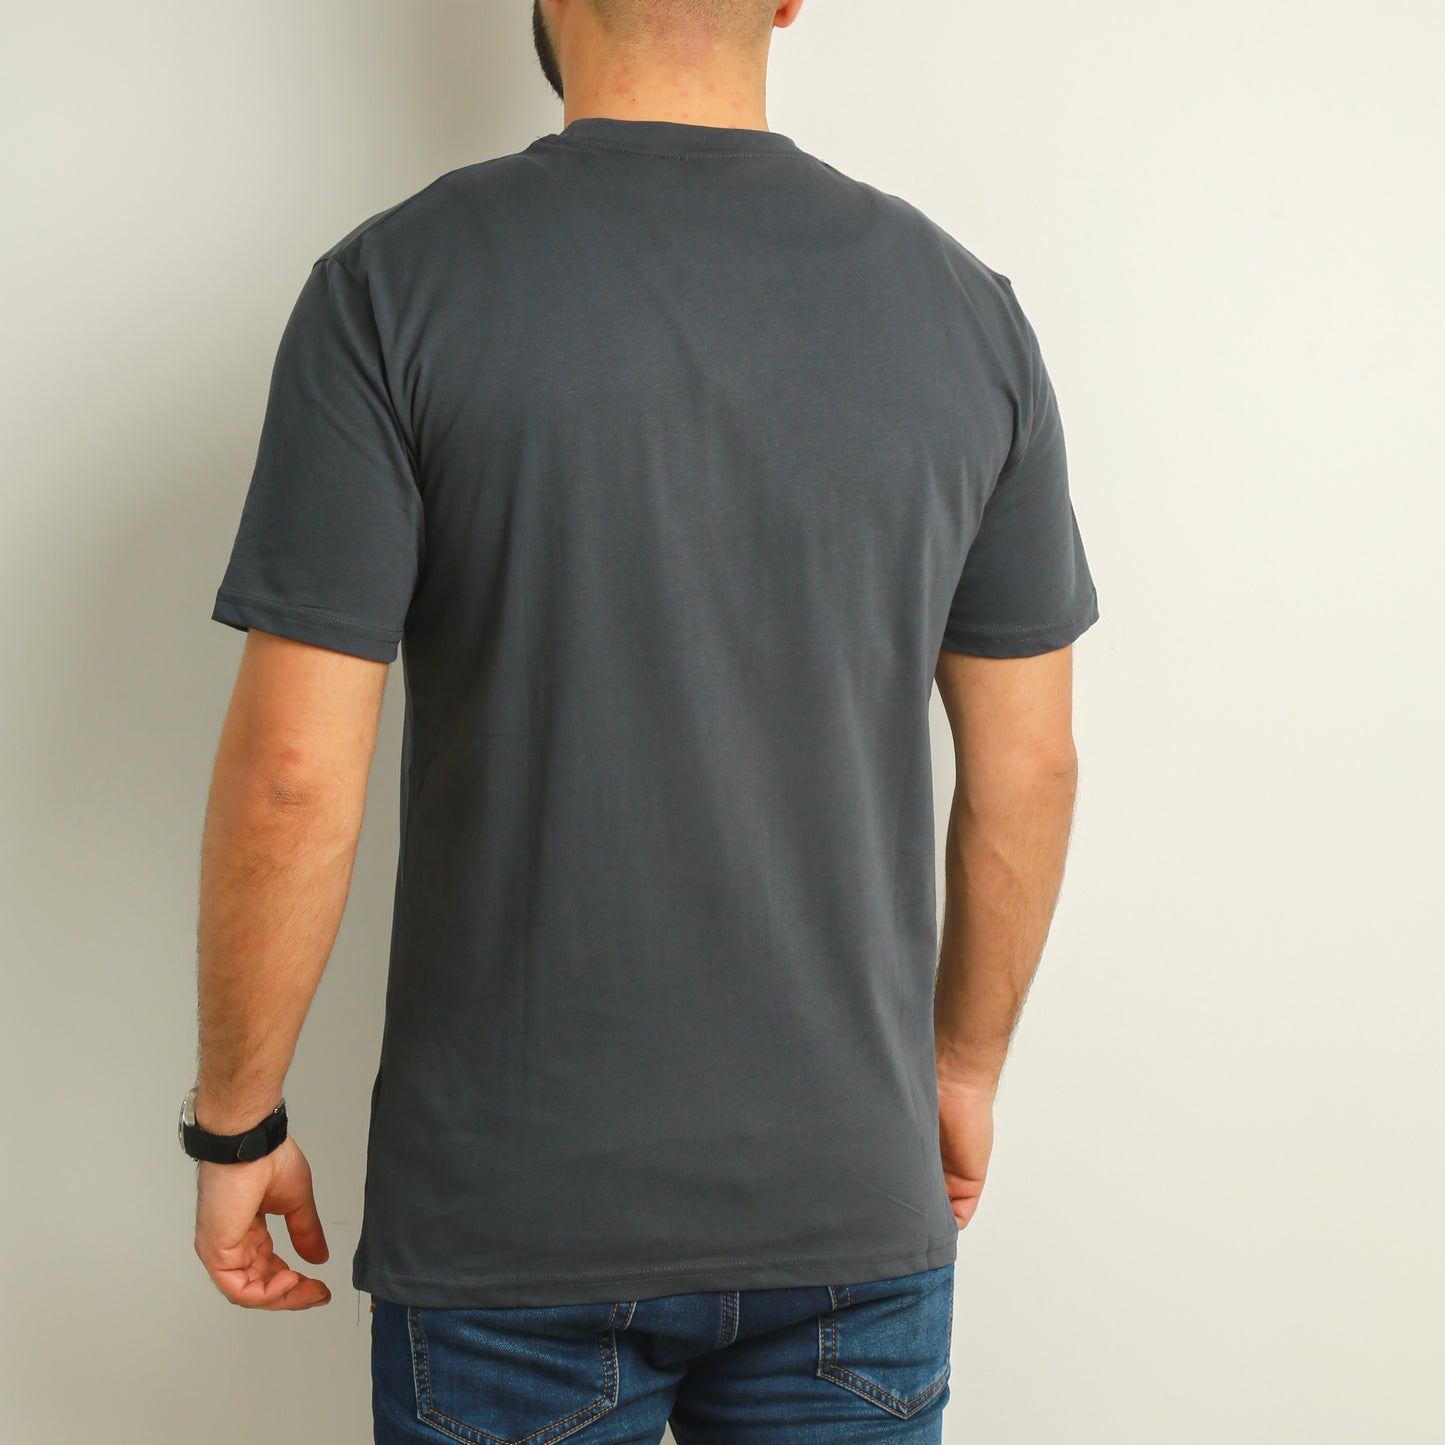 US Polo T-Shirt Homme - Gris